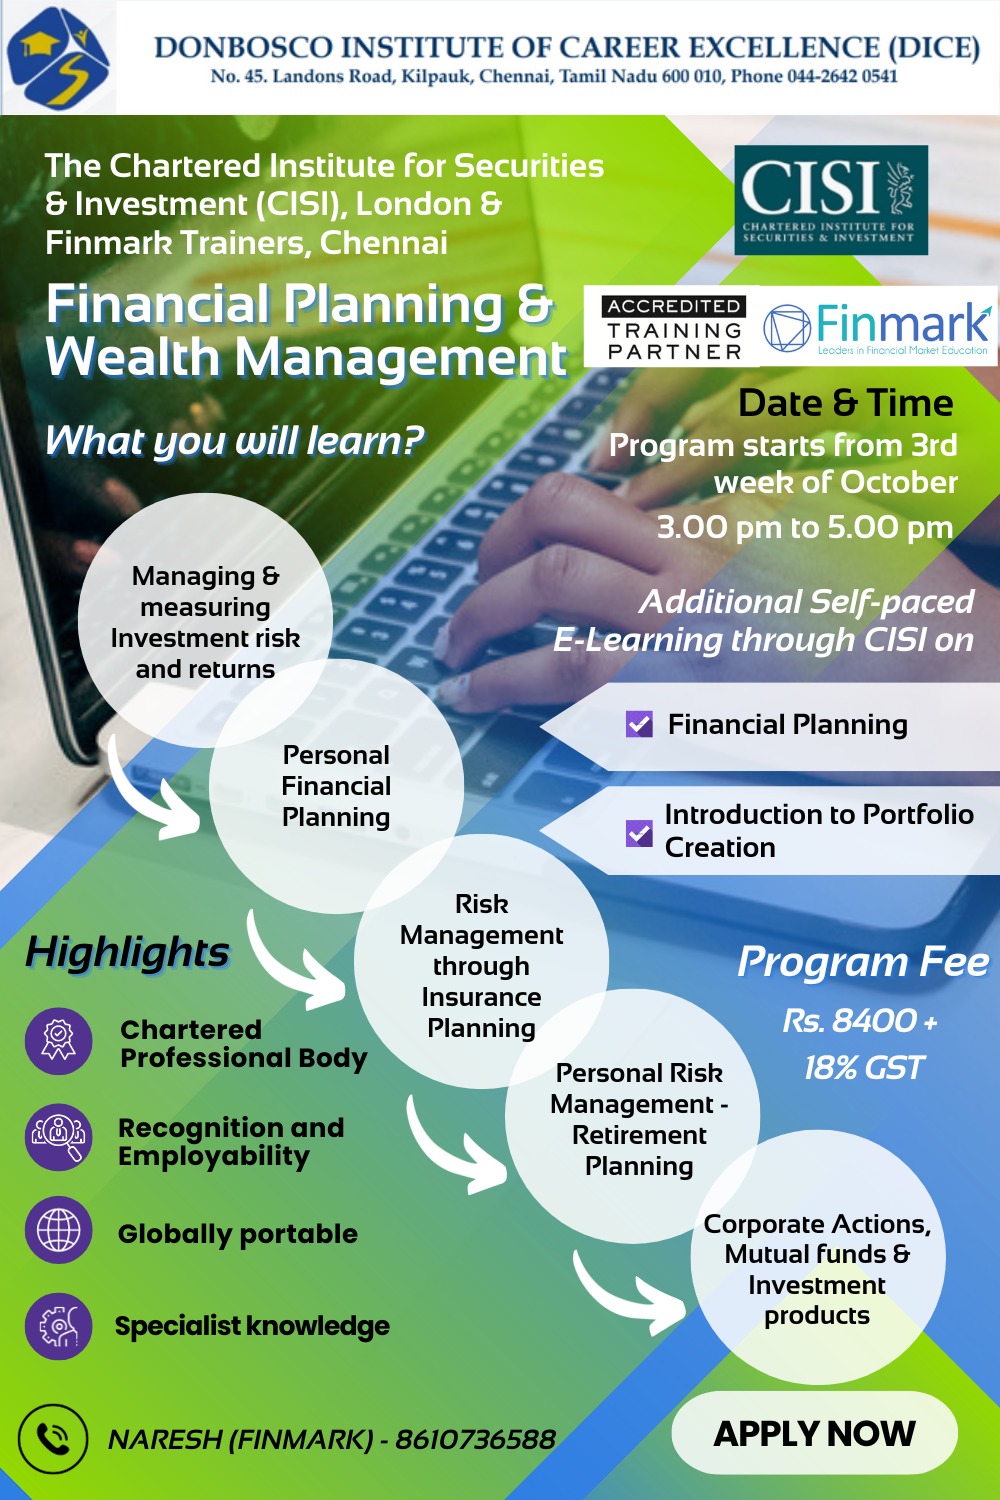 CISI Financial Planning and Wealth Management